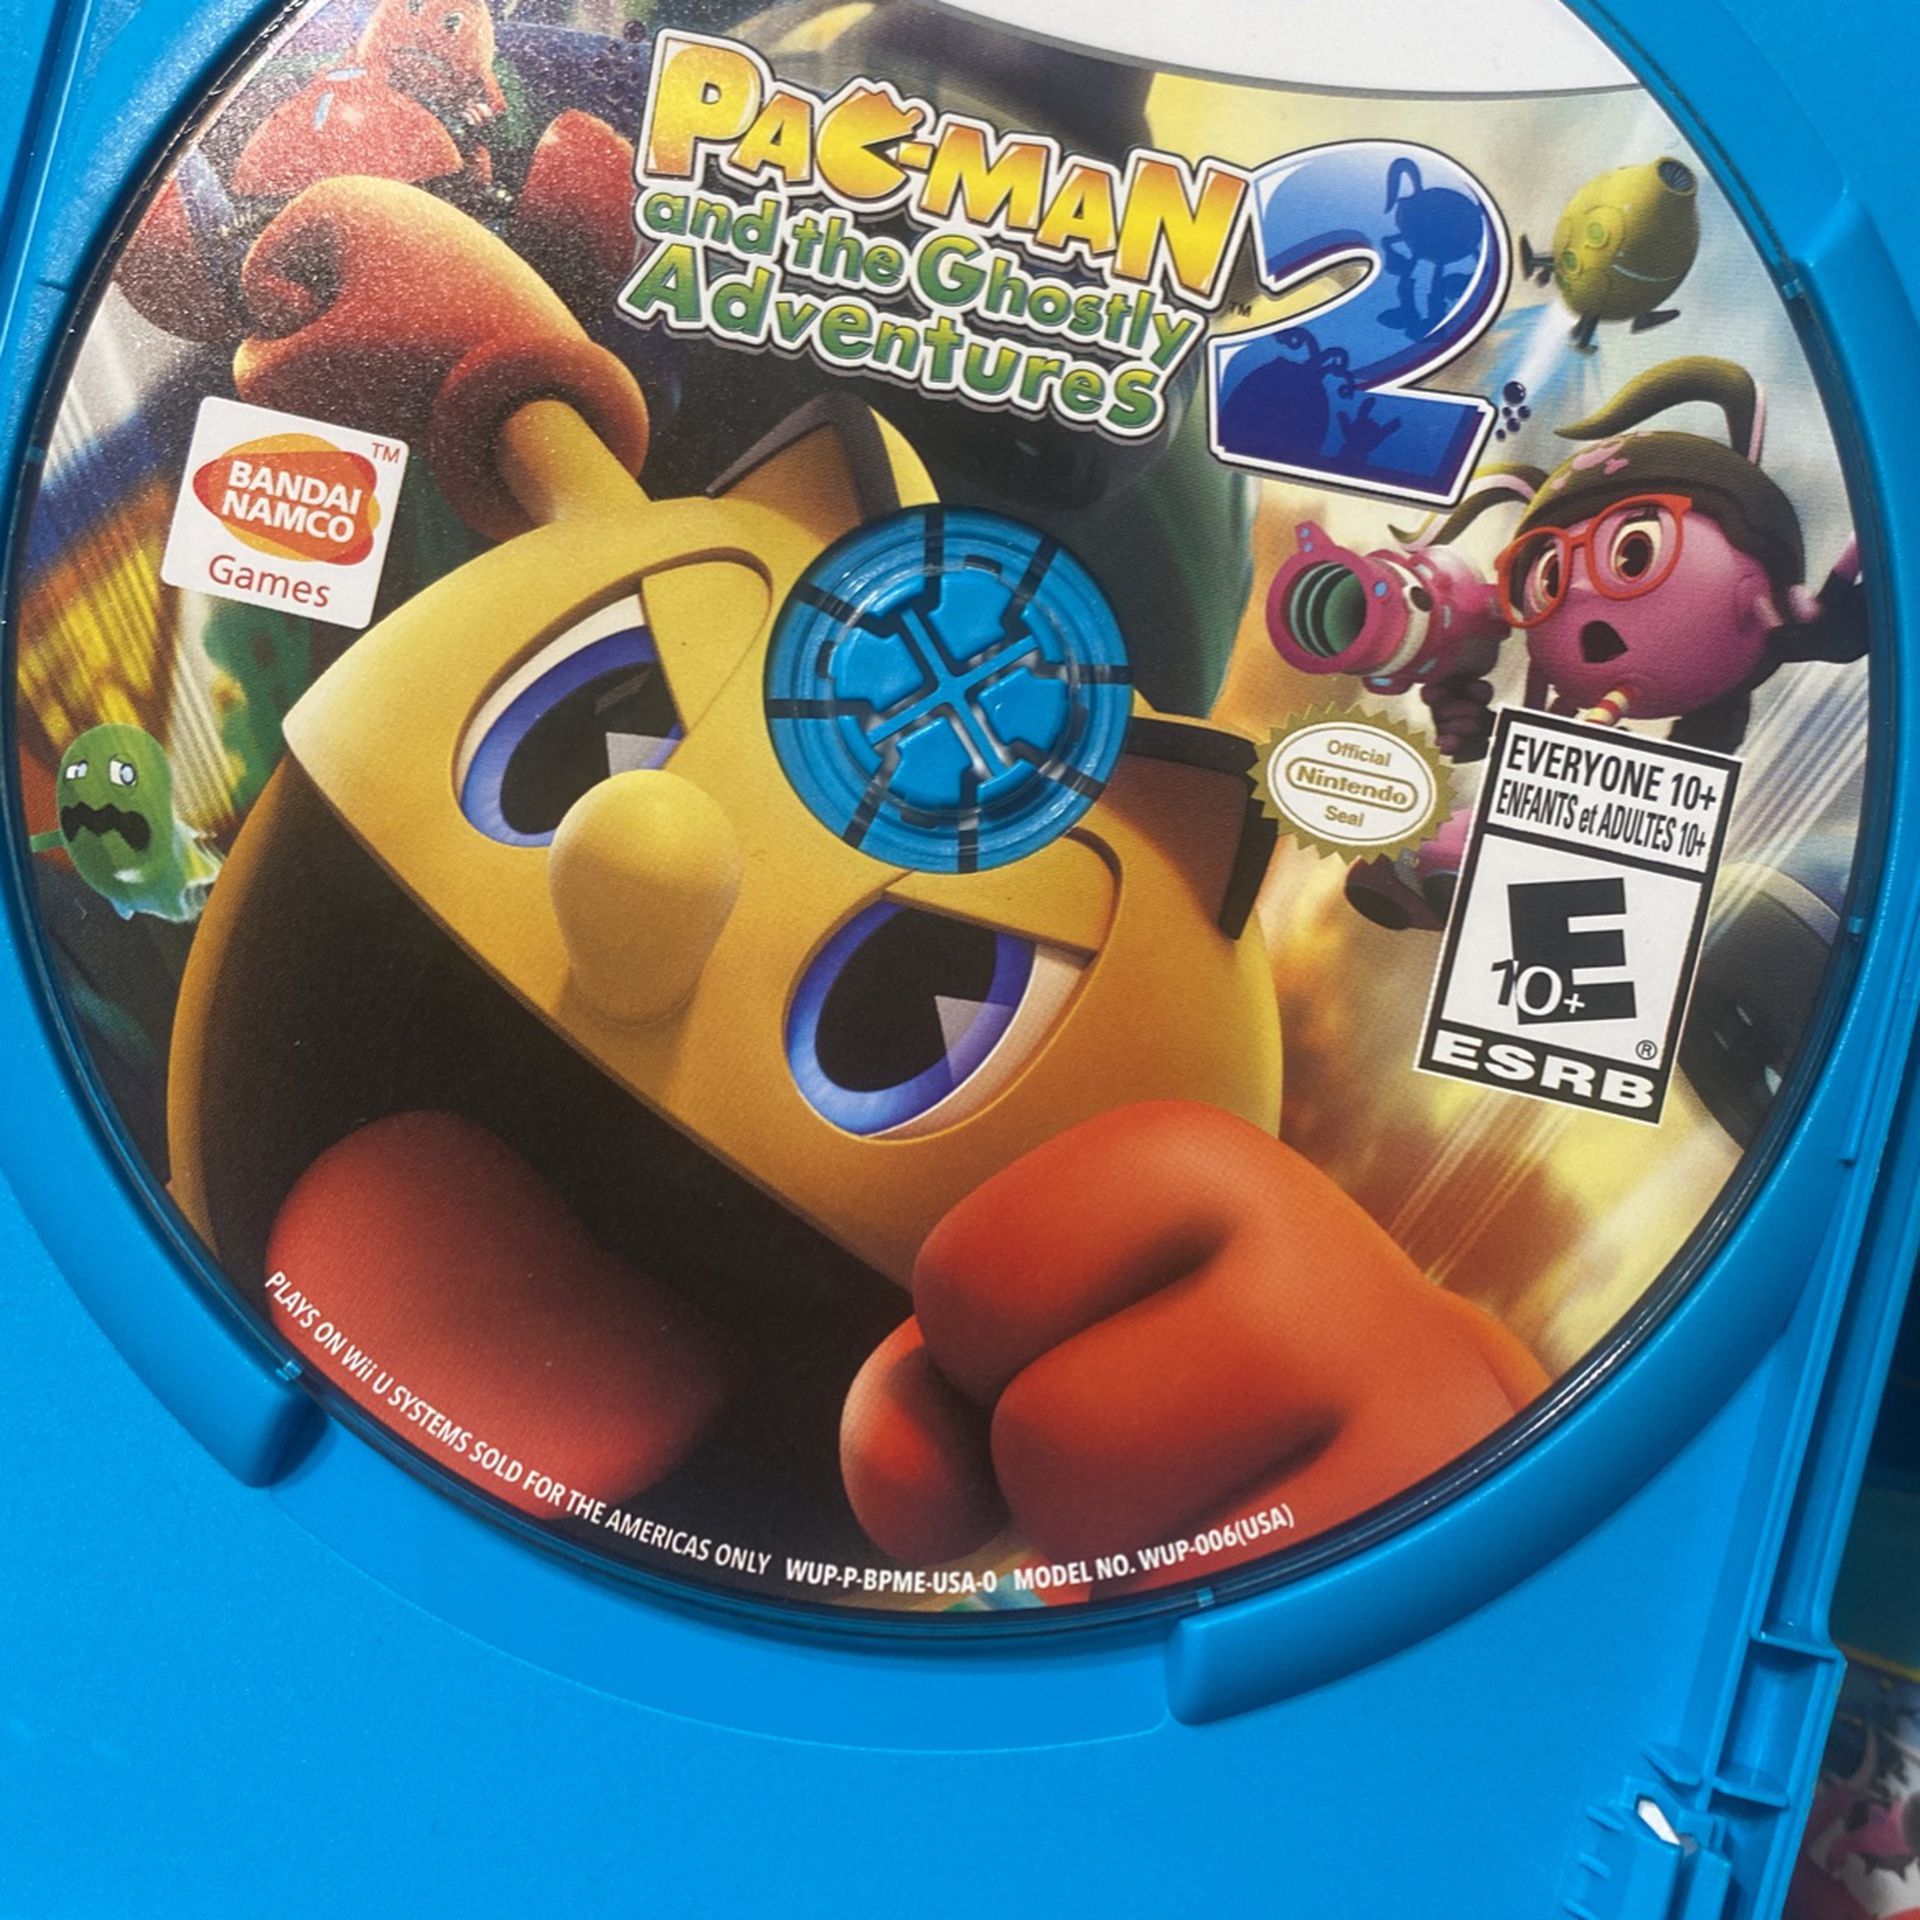 PAC Man Ghostly Adventures 1 & 2